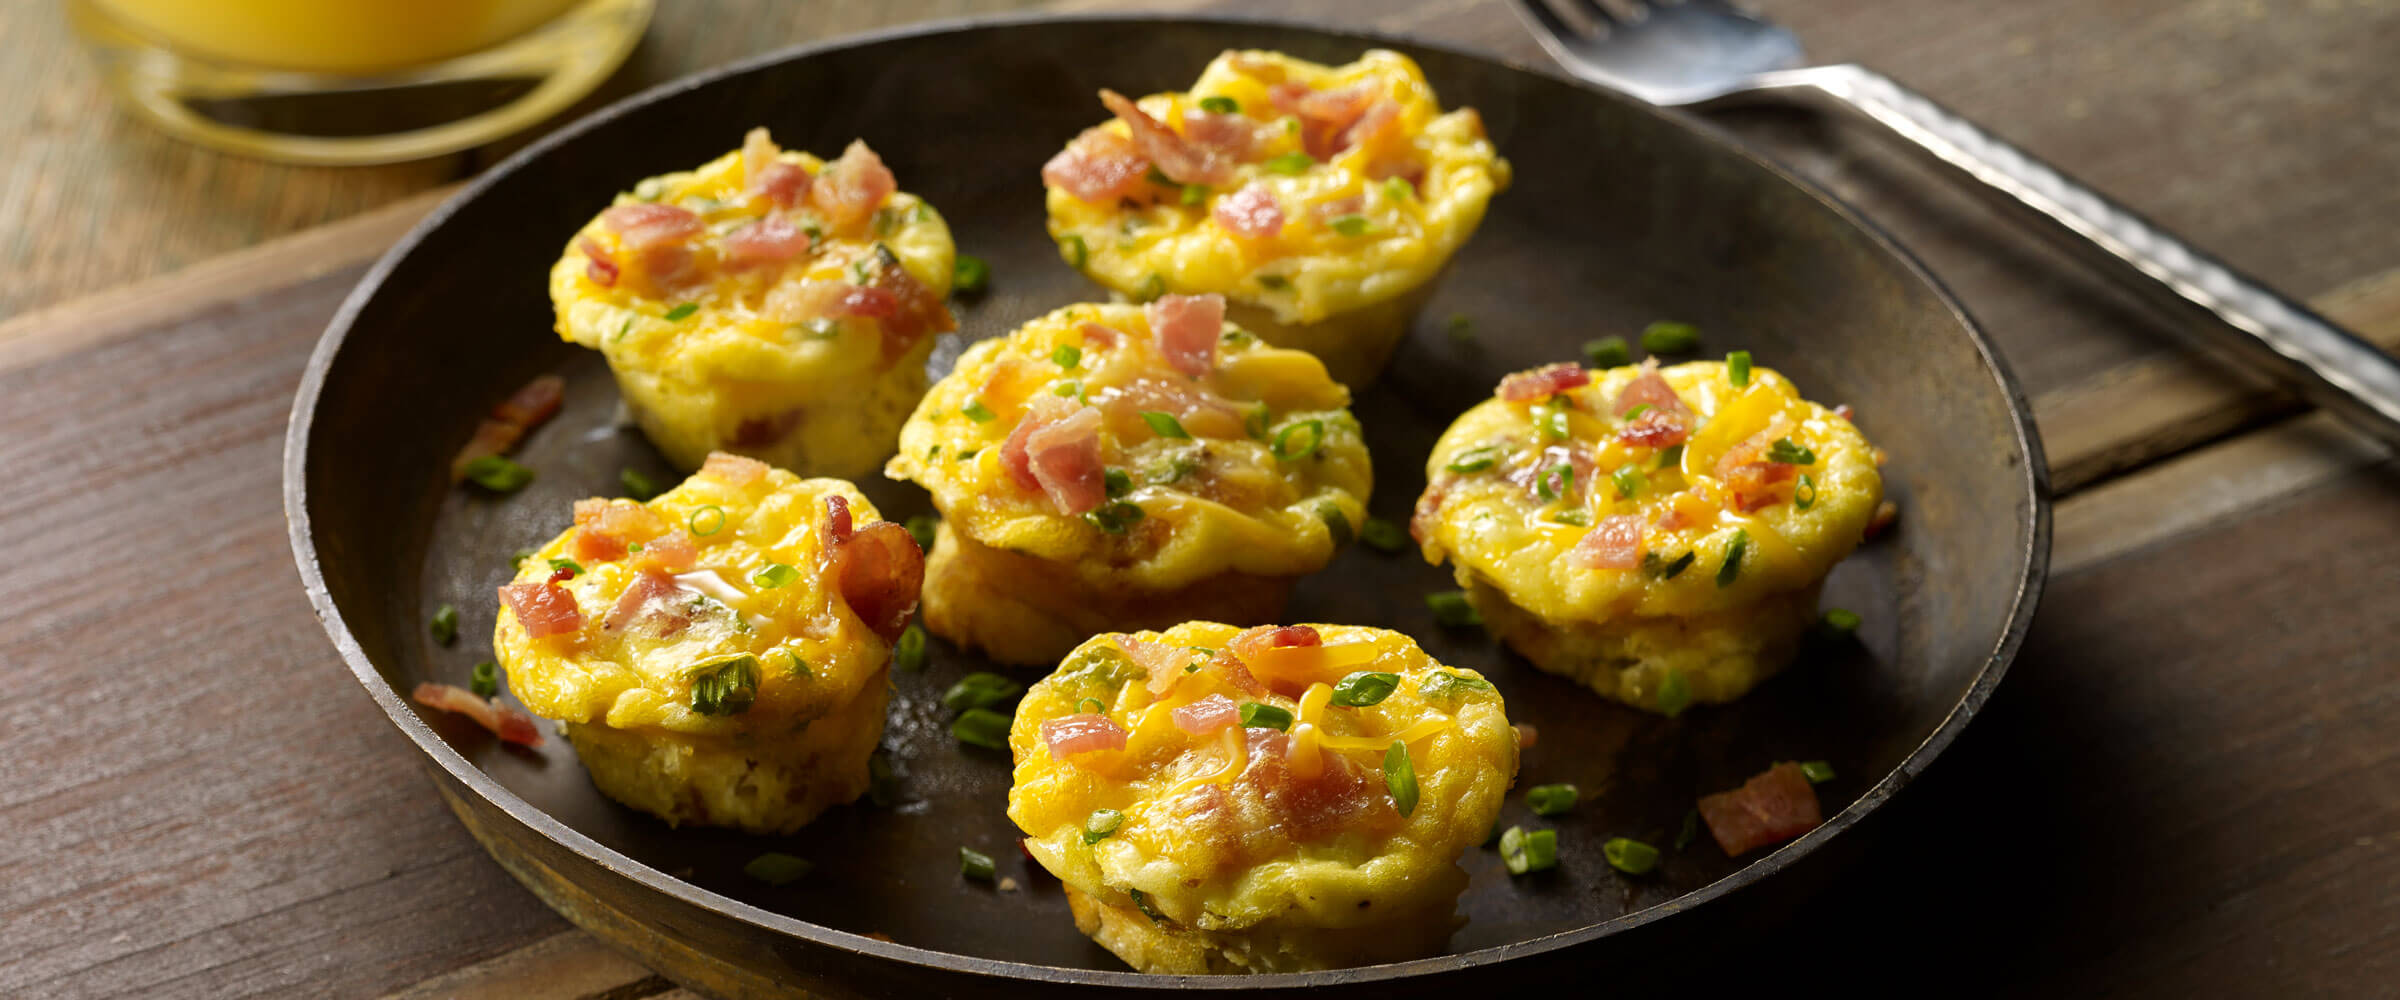 Mini Bacon and Egg Muffins topped with chives on brown plate